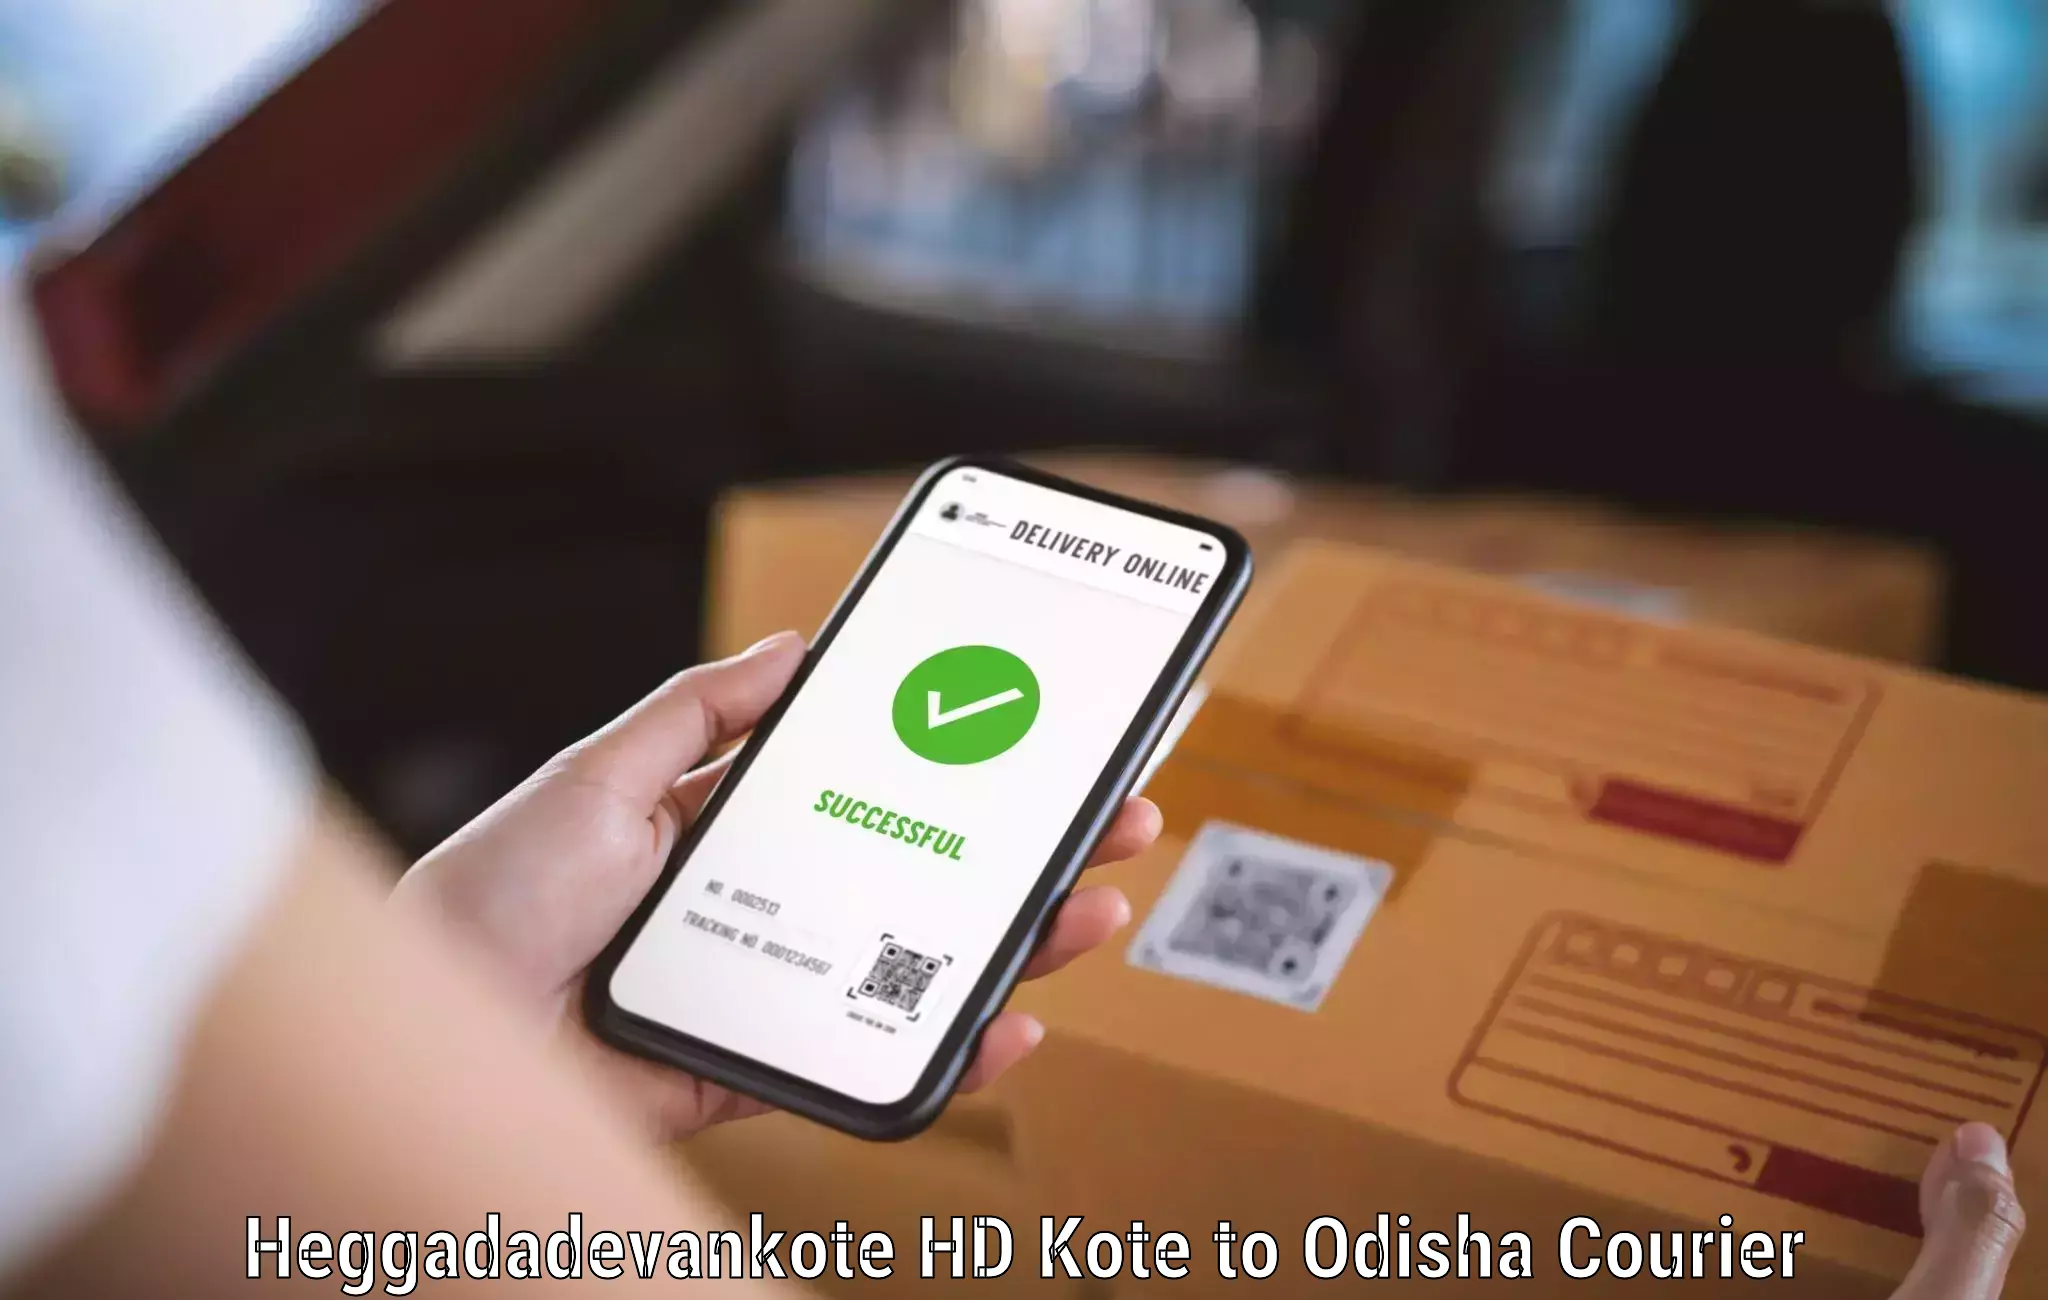 Trackable shipping service Heggadadevankote HD Kote to Parmanpur